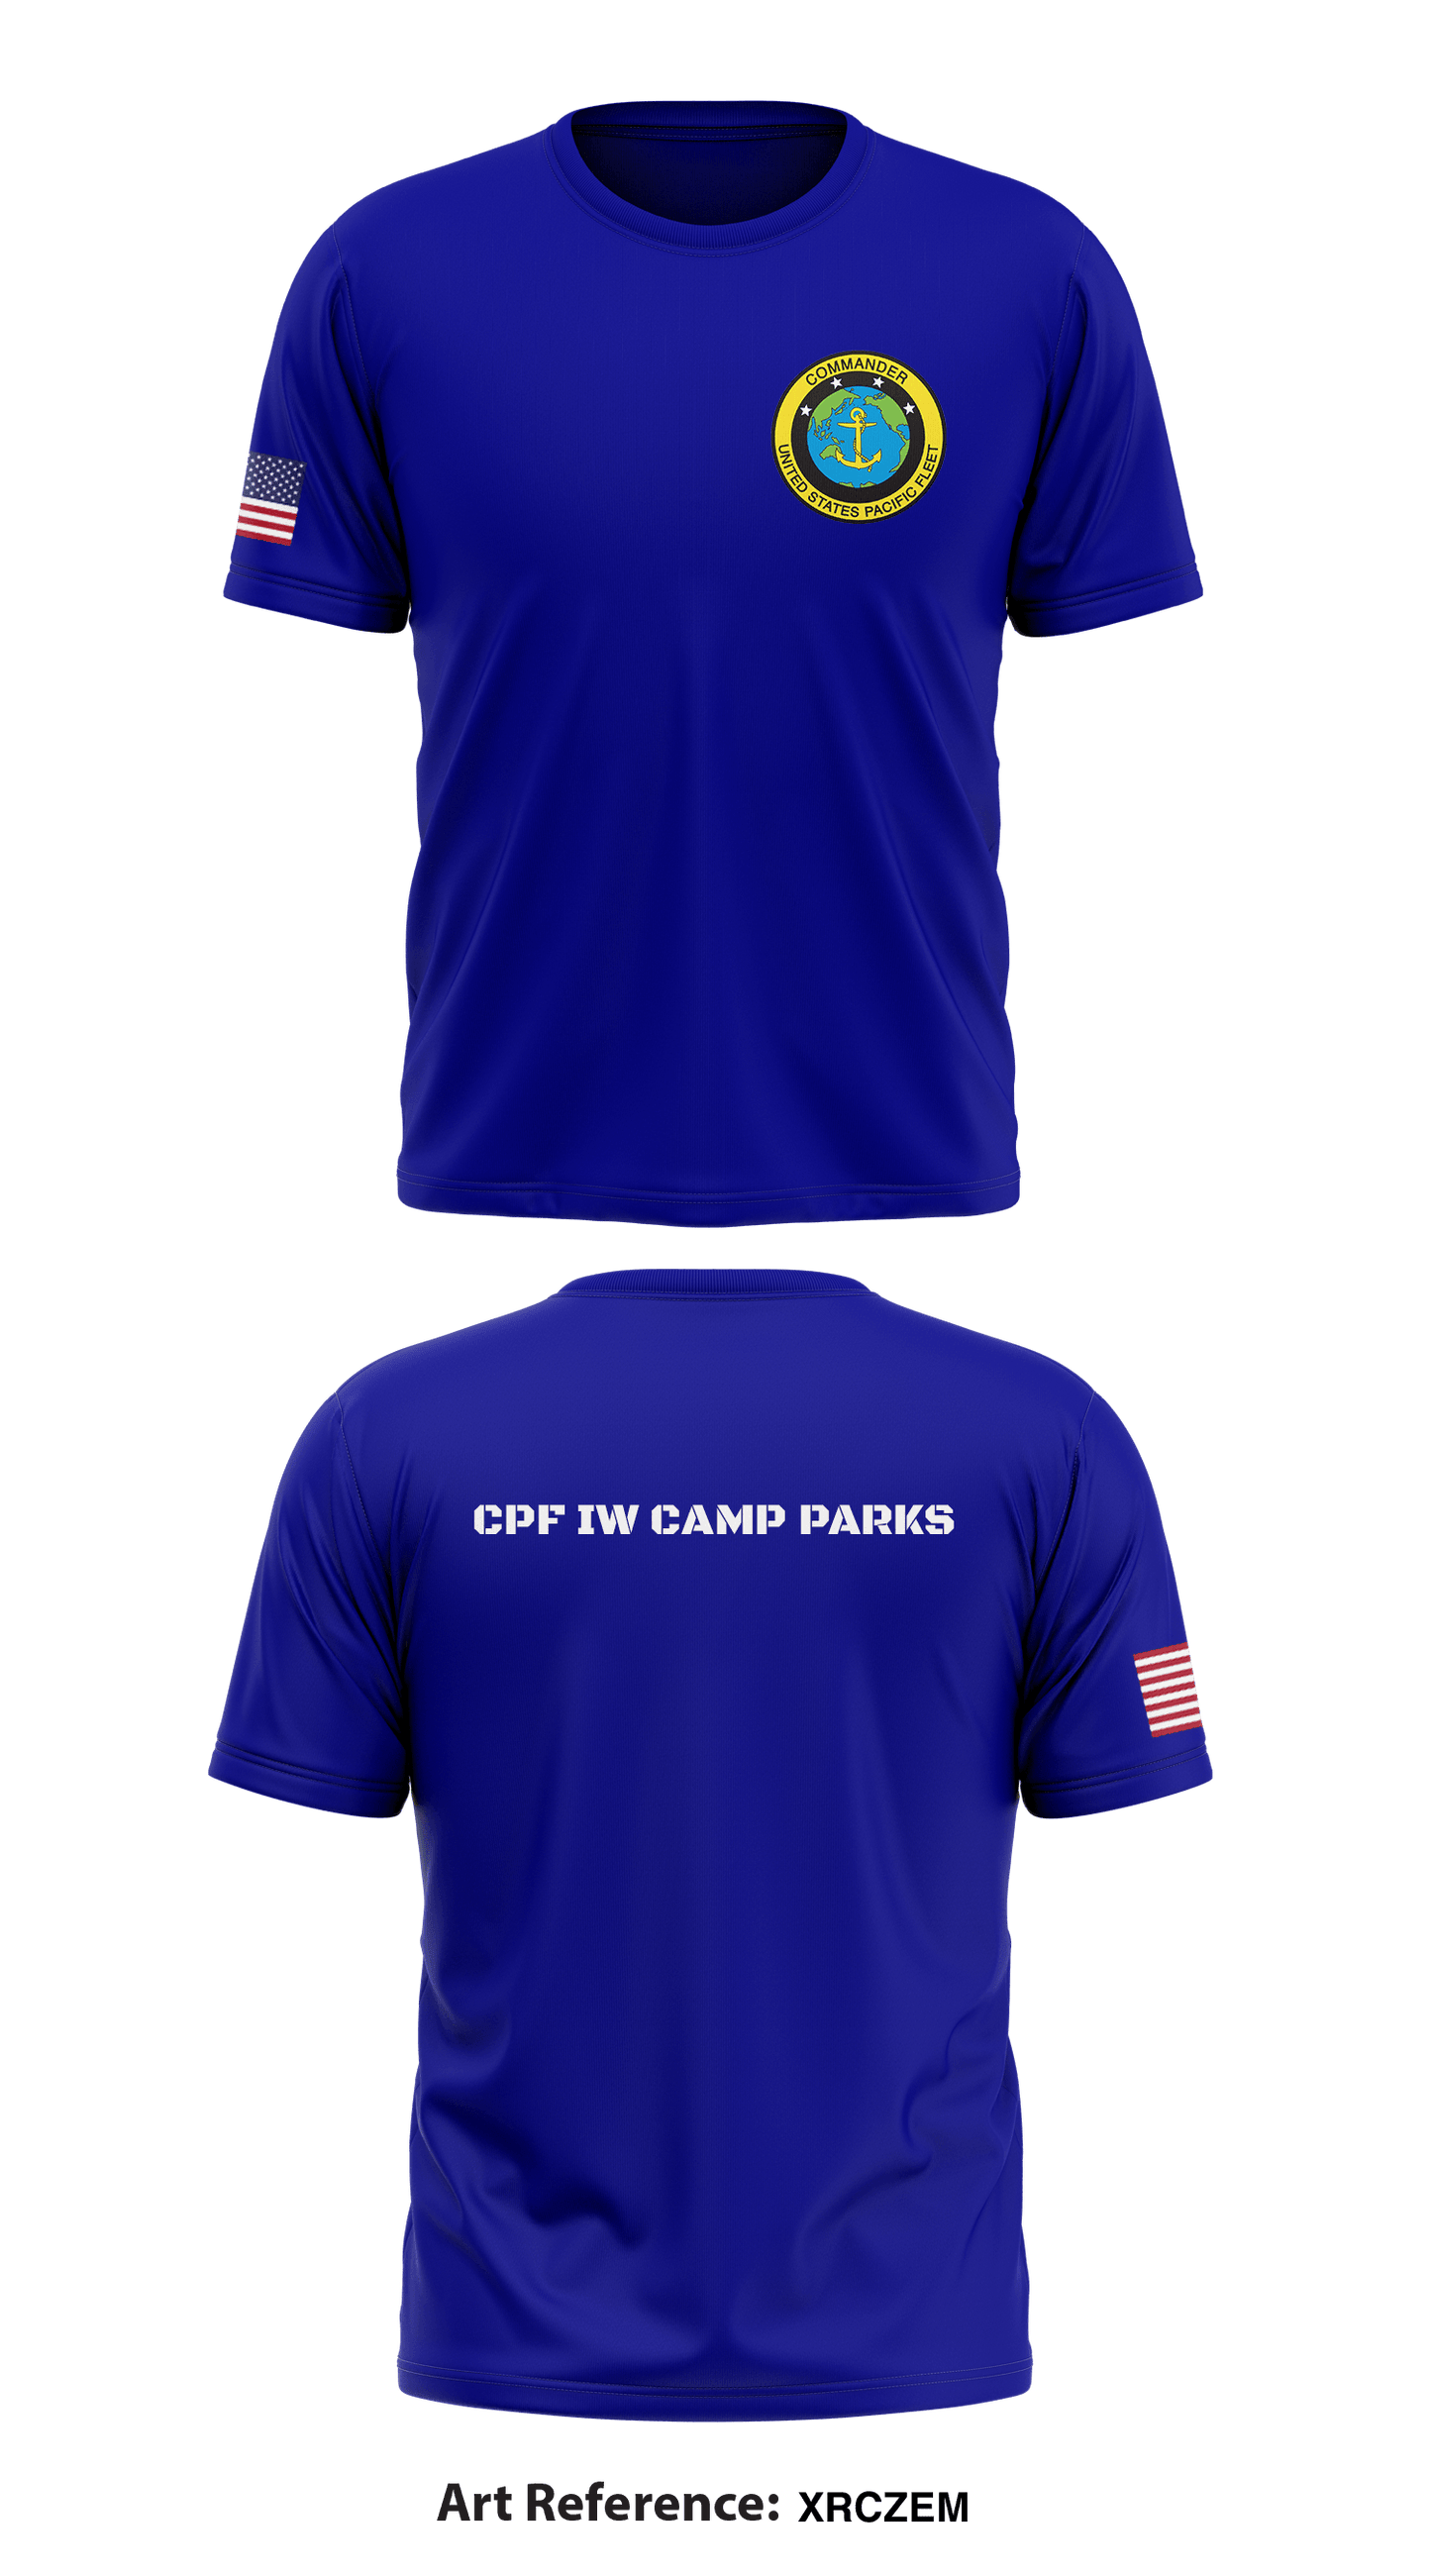 CPF IW CAMP PARKS Store 1 Core Men's SS Performance Tee - XrcZEM